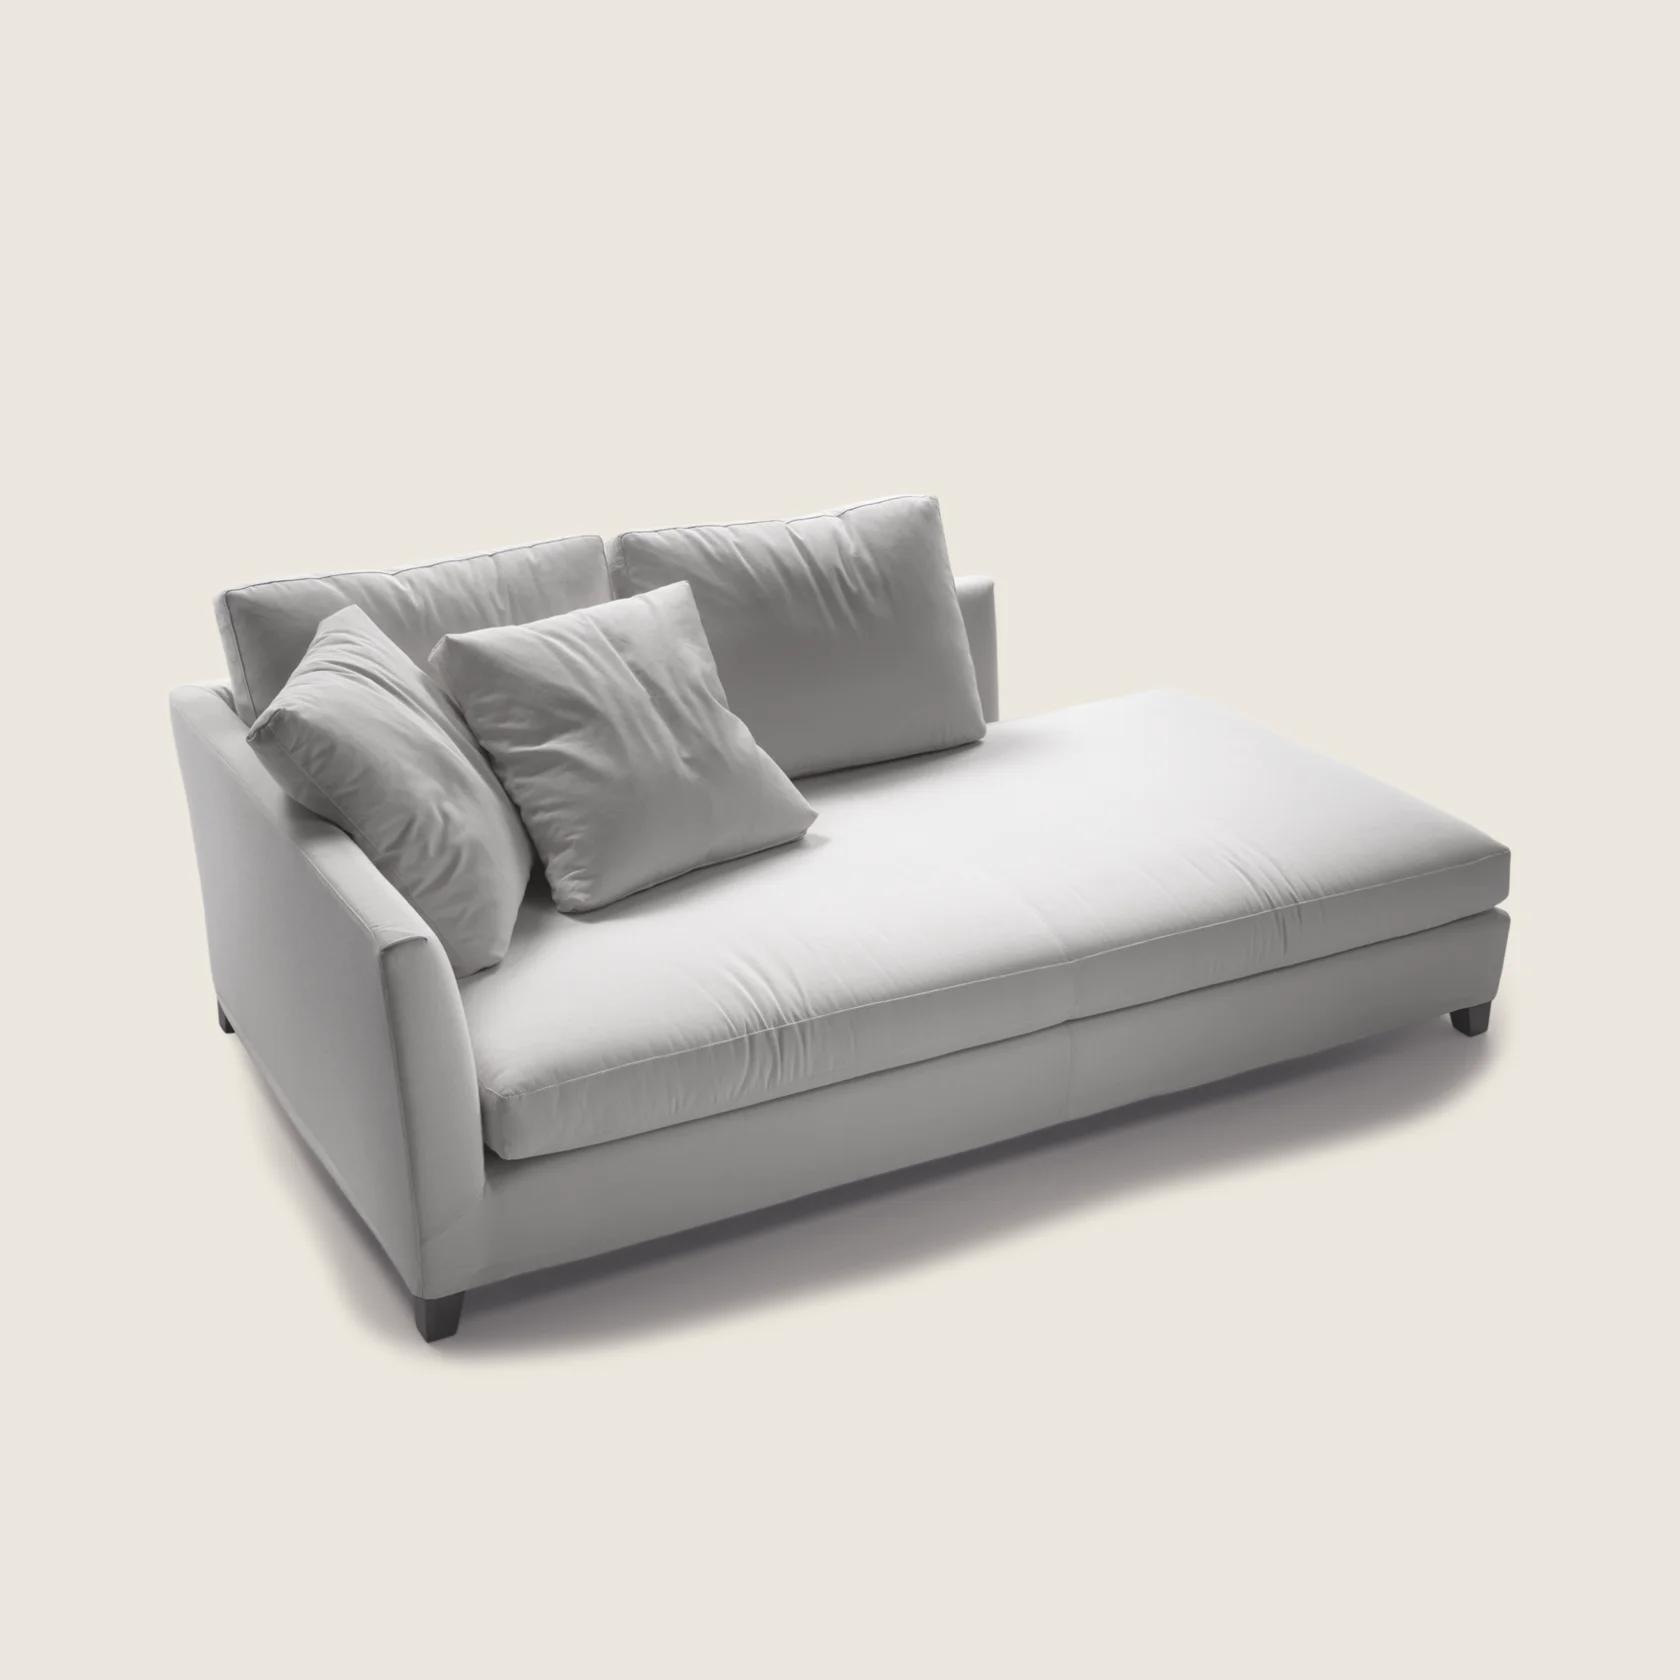 014221_VICTOR_CHAISELONGUE_01.png